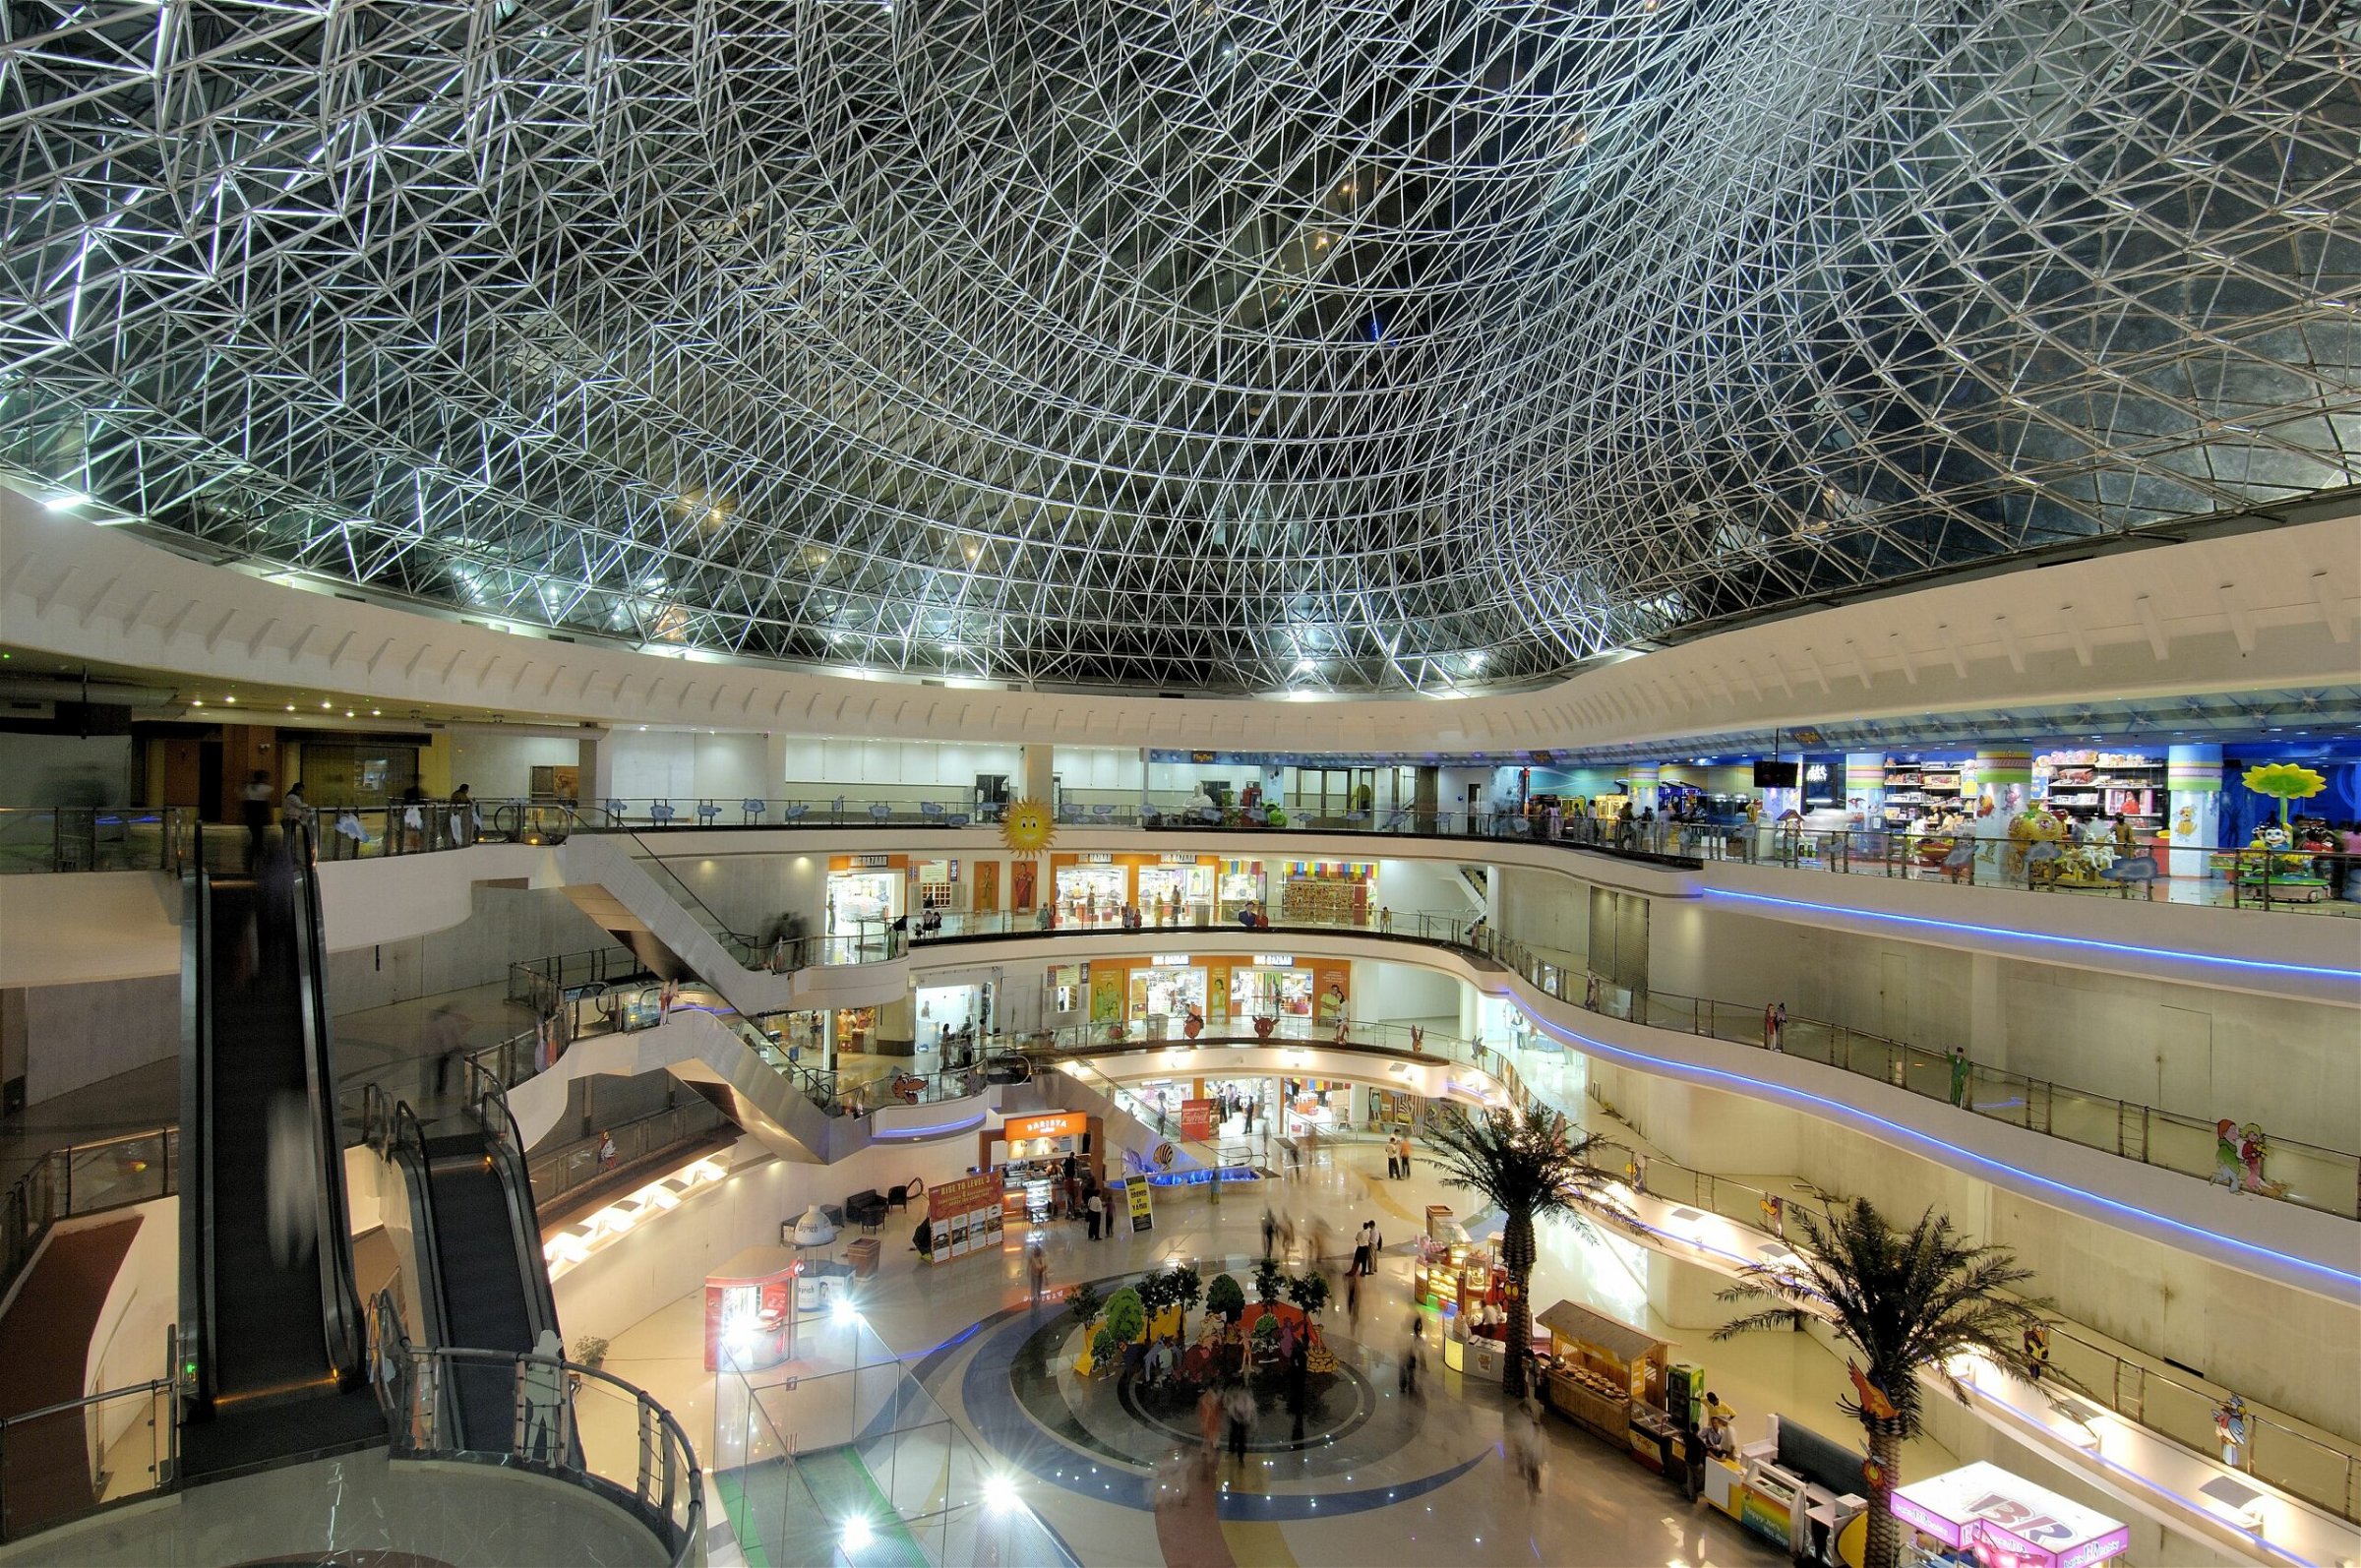 Raghuleela Mall: How to reach and what to shop?